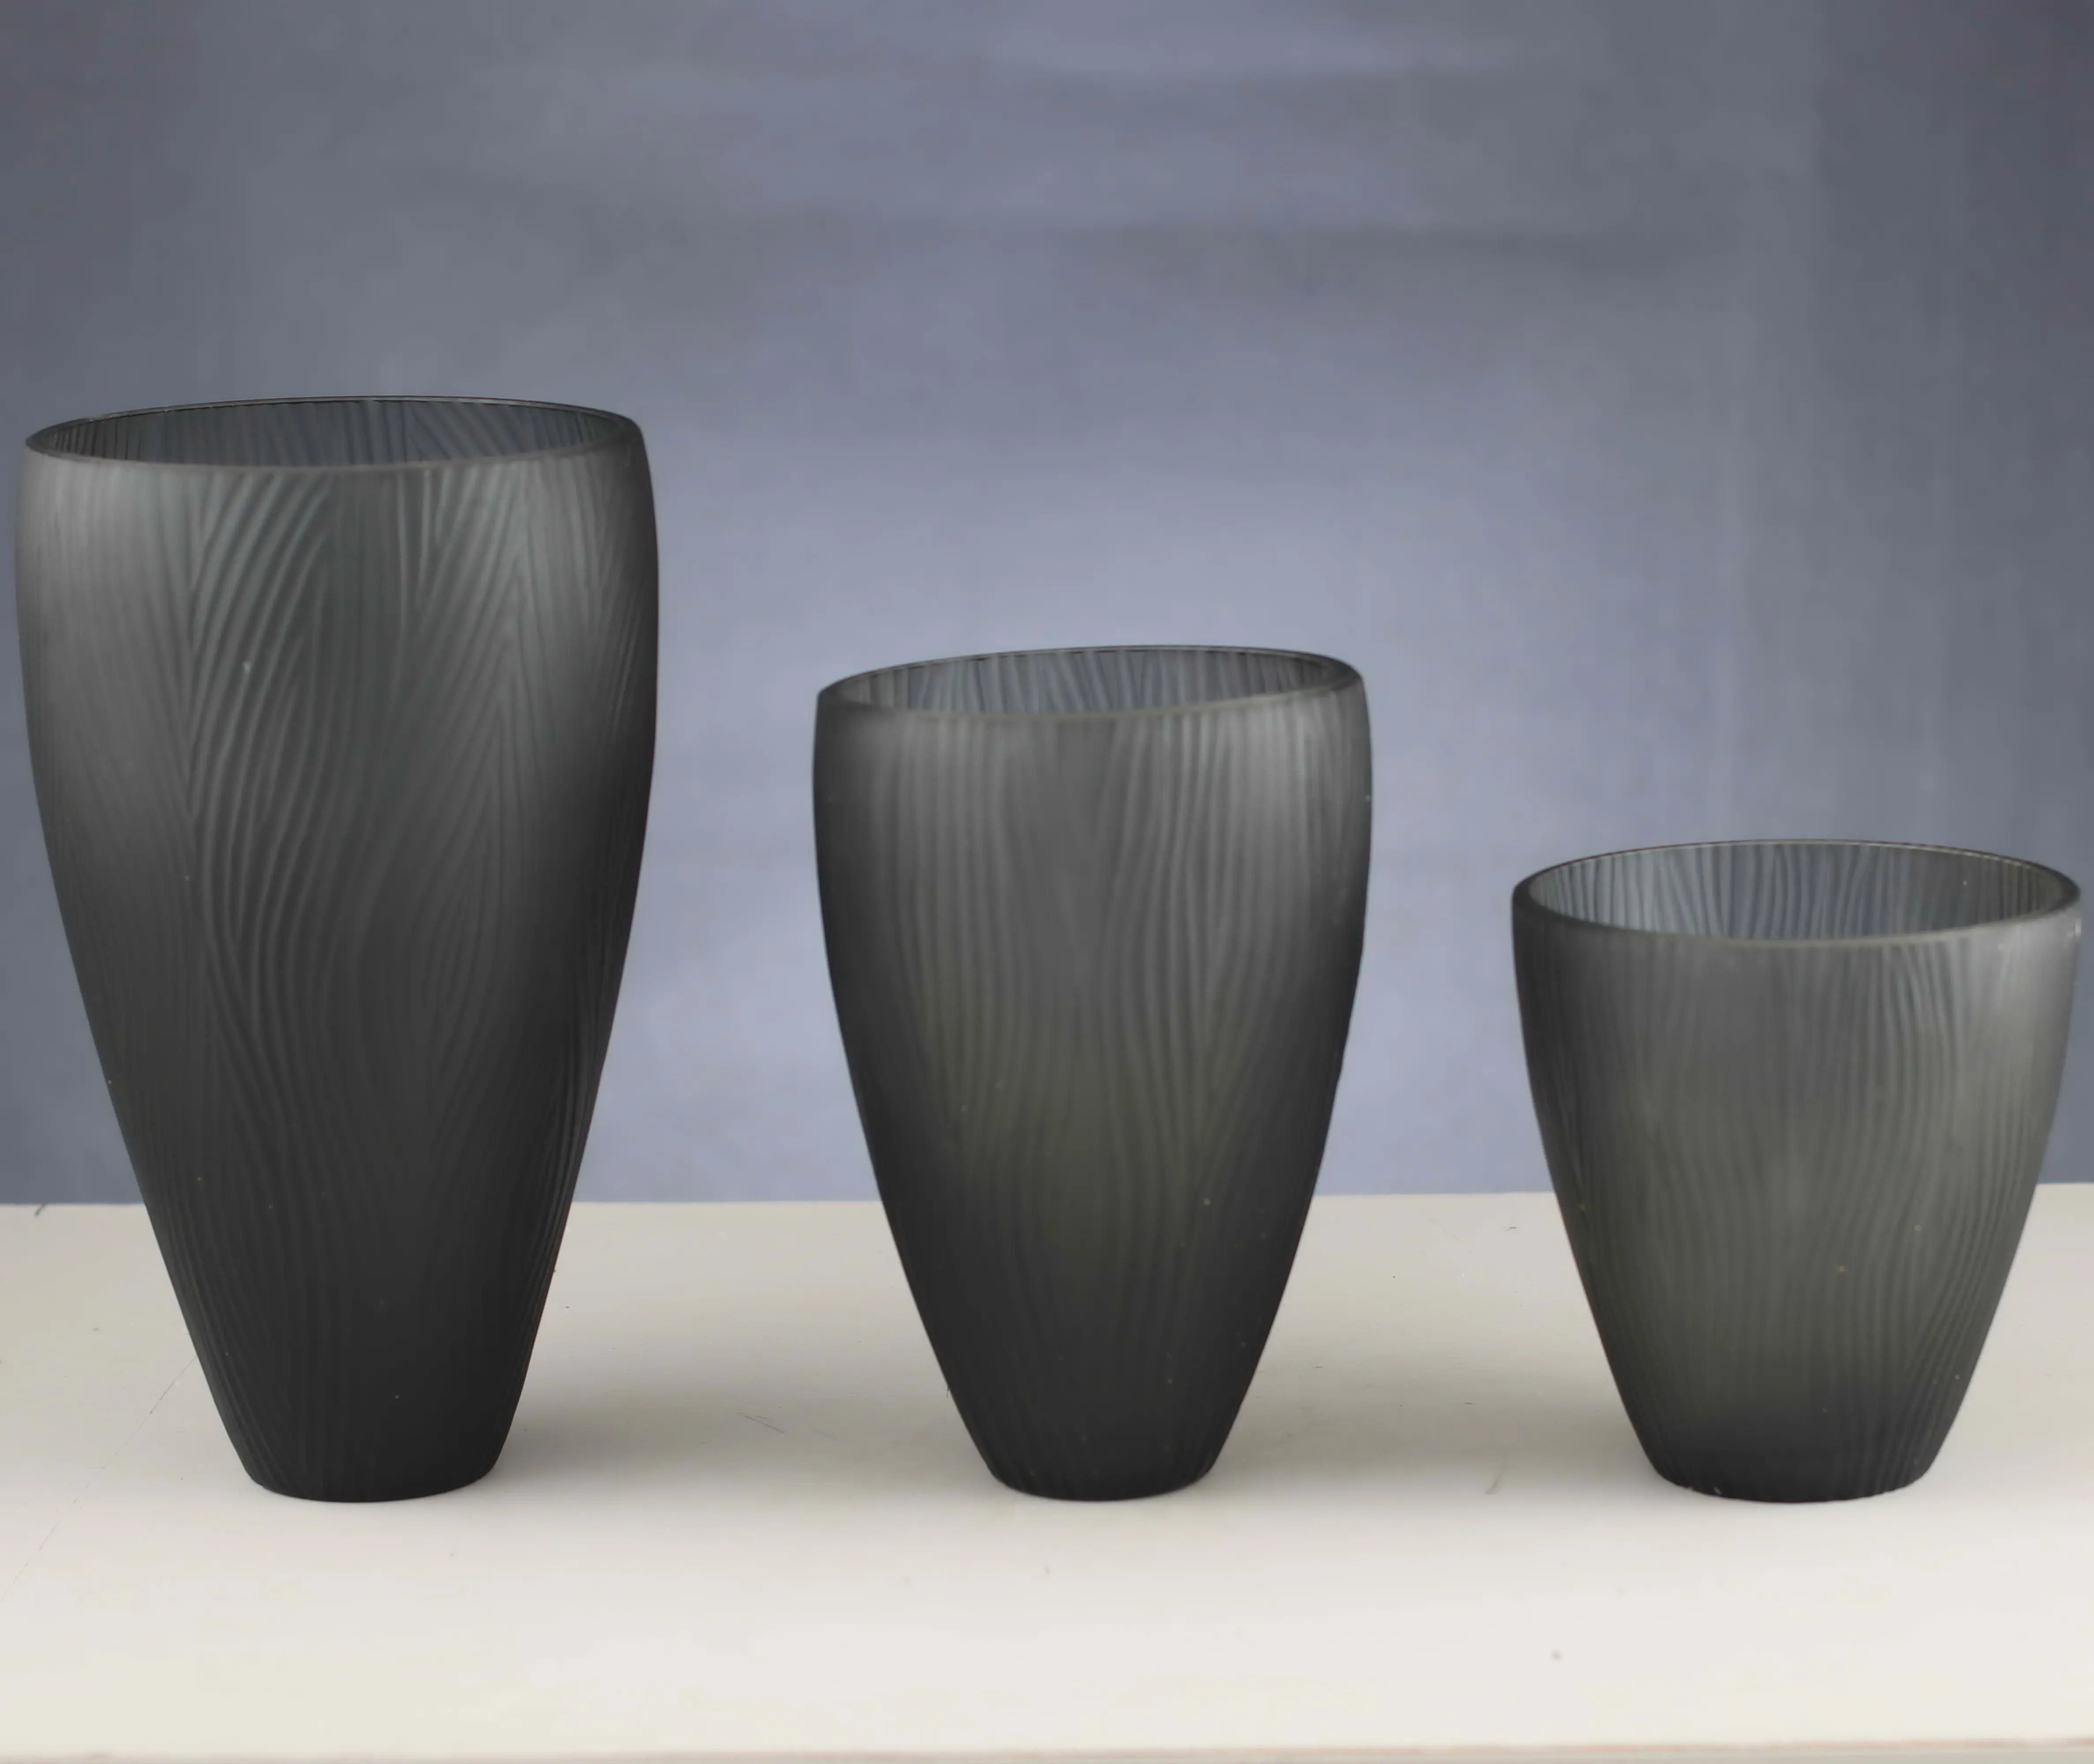 Black etching vases decorate the living room and meeting room other home decor